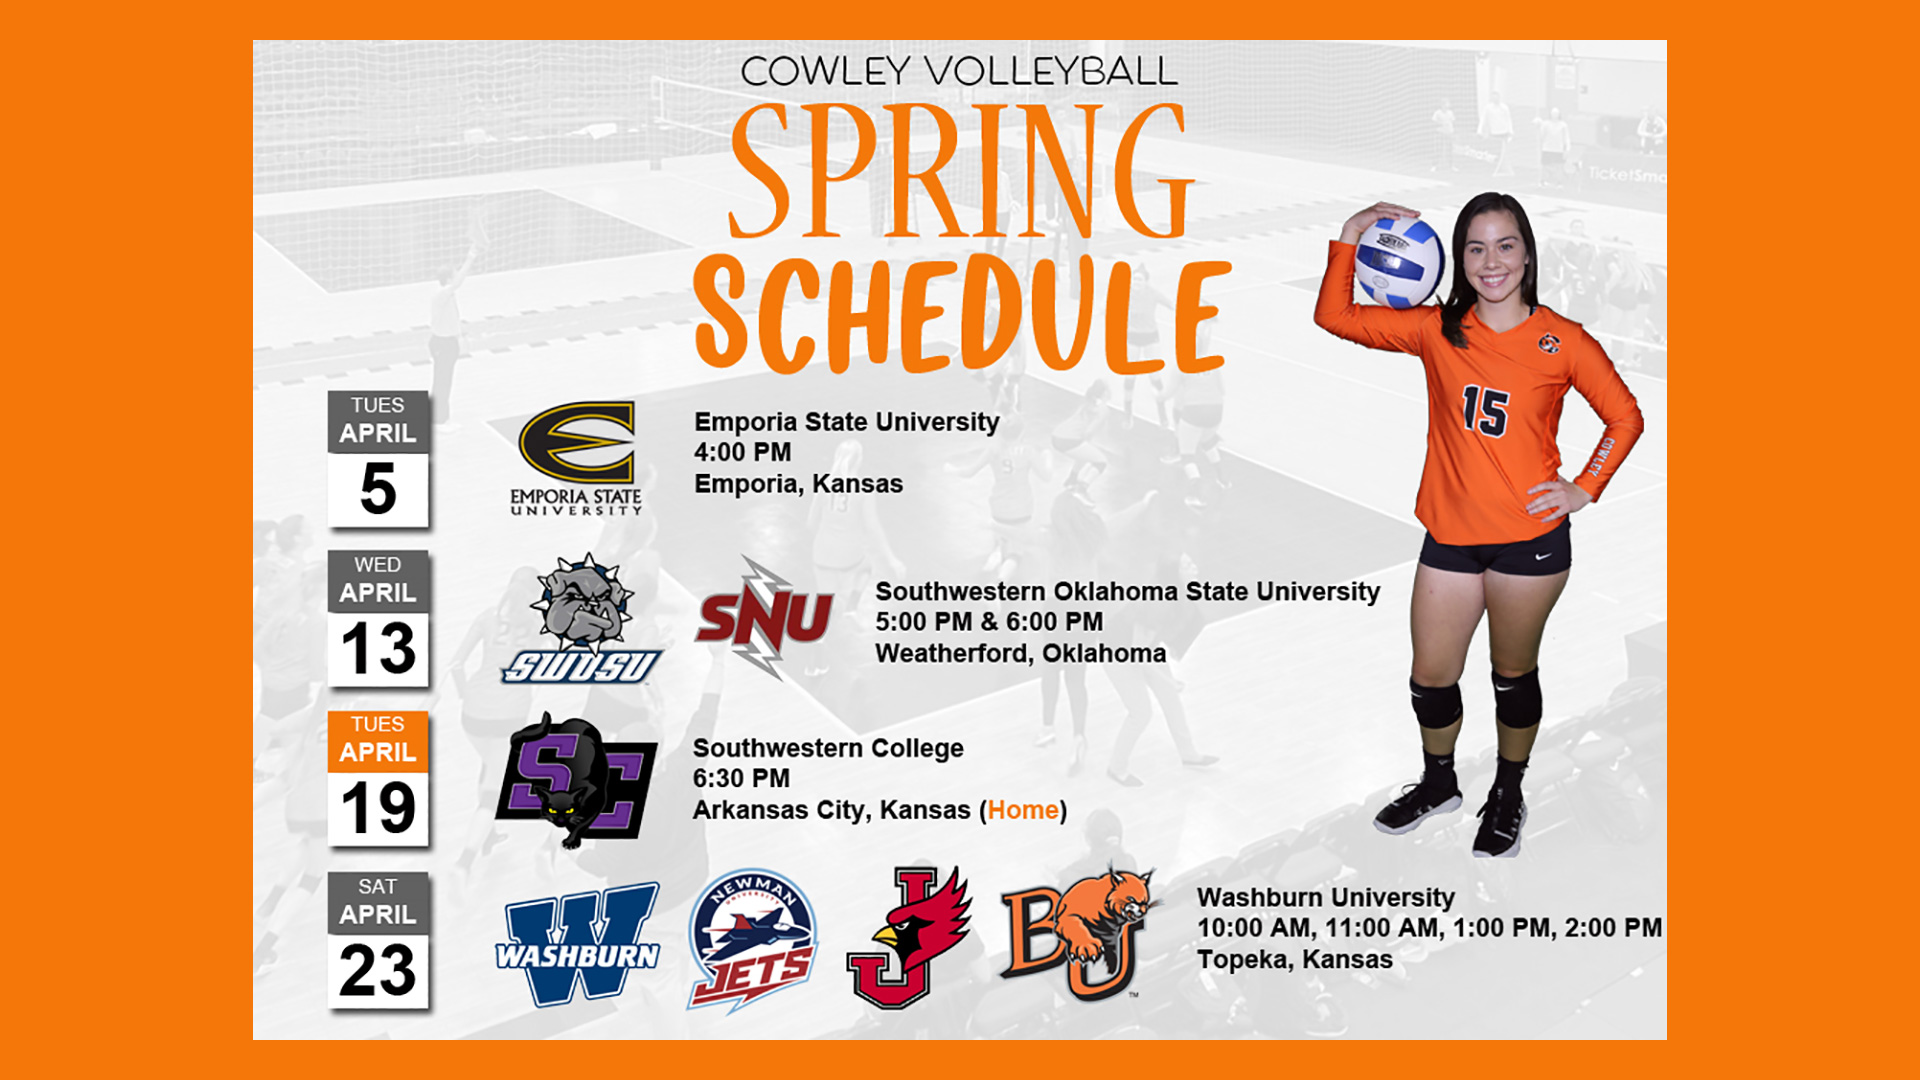 The Cowley College volleyball team has released its spring schedule for 2022